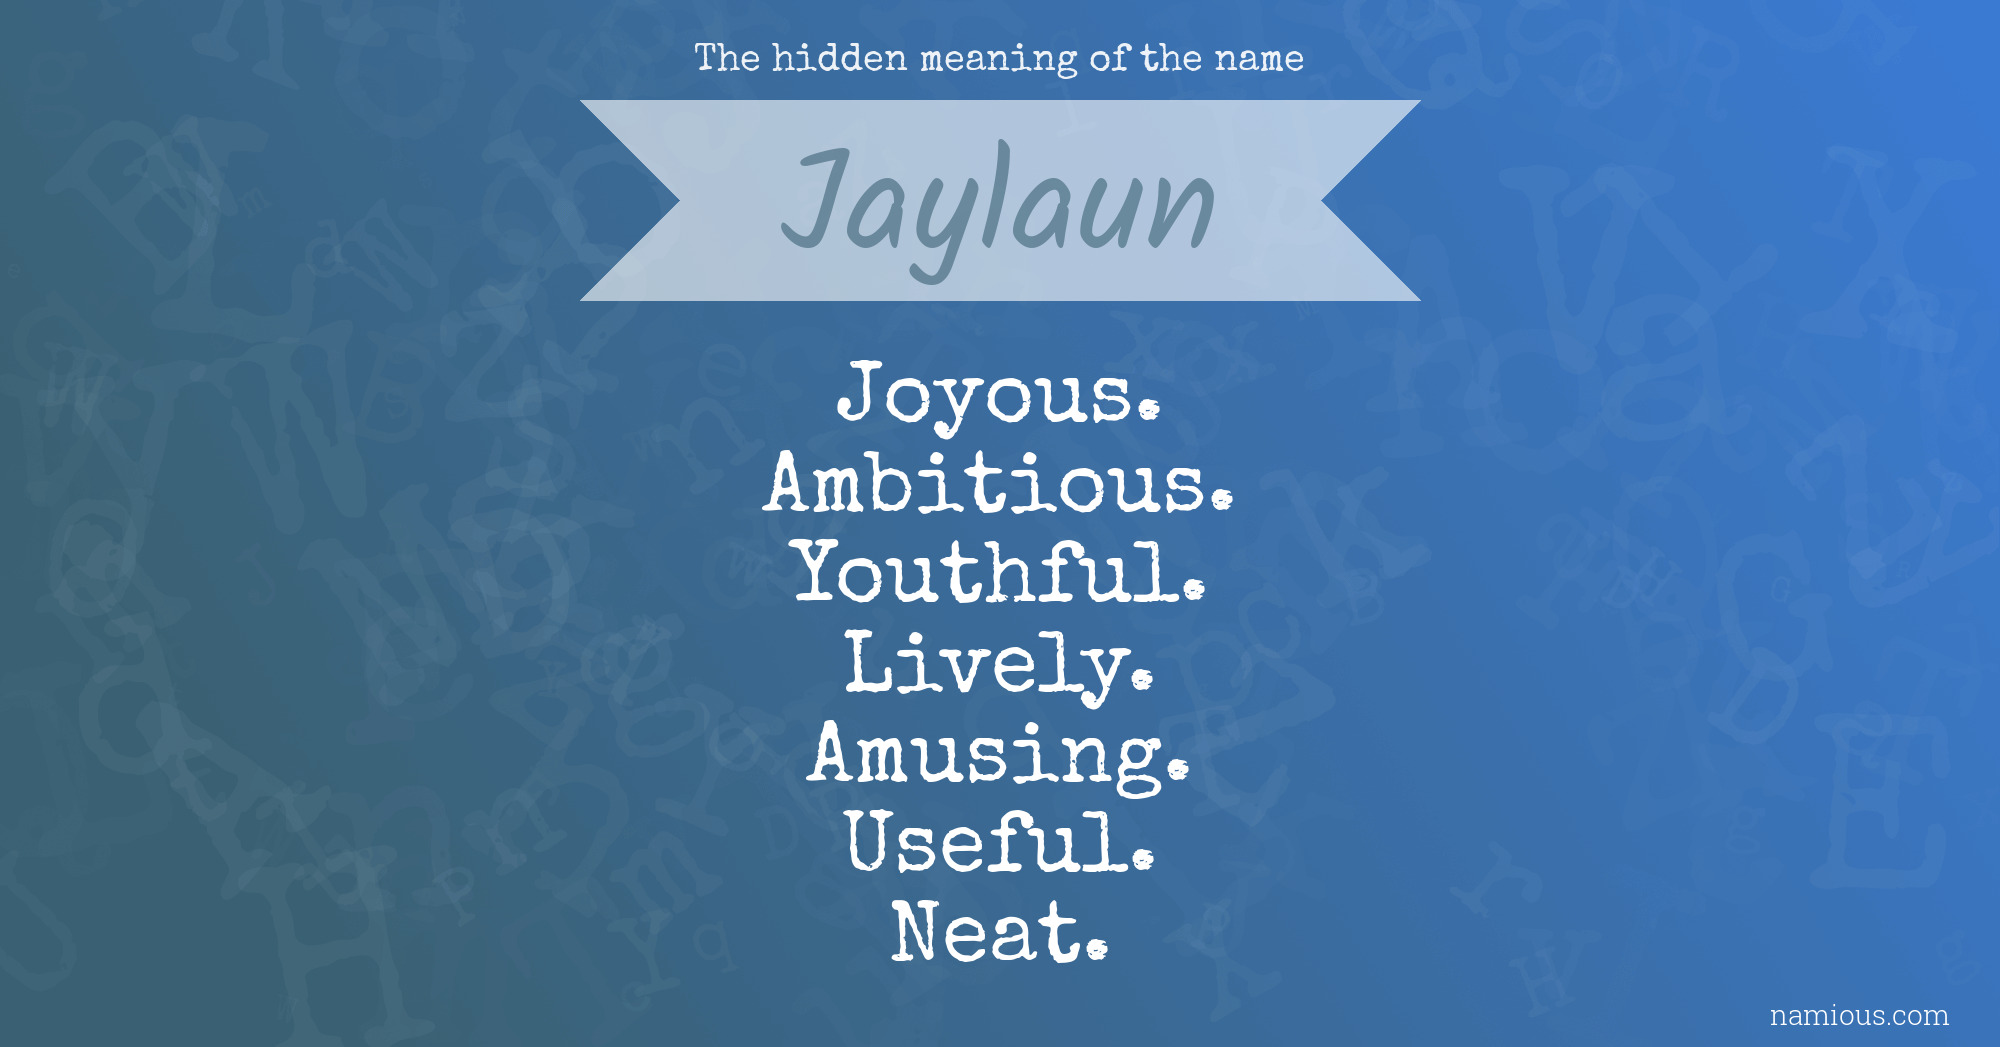 The hidden meaning of the name Jaylaun